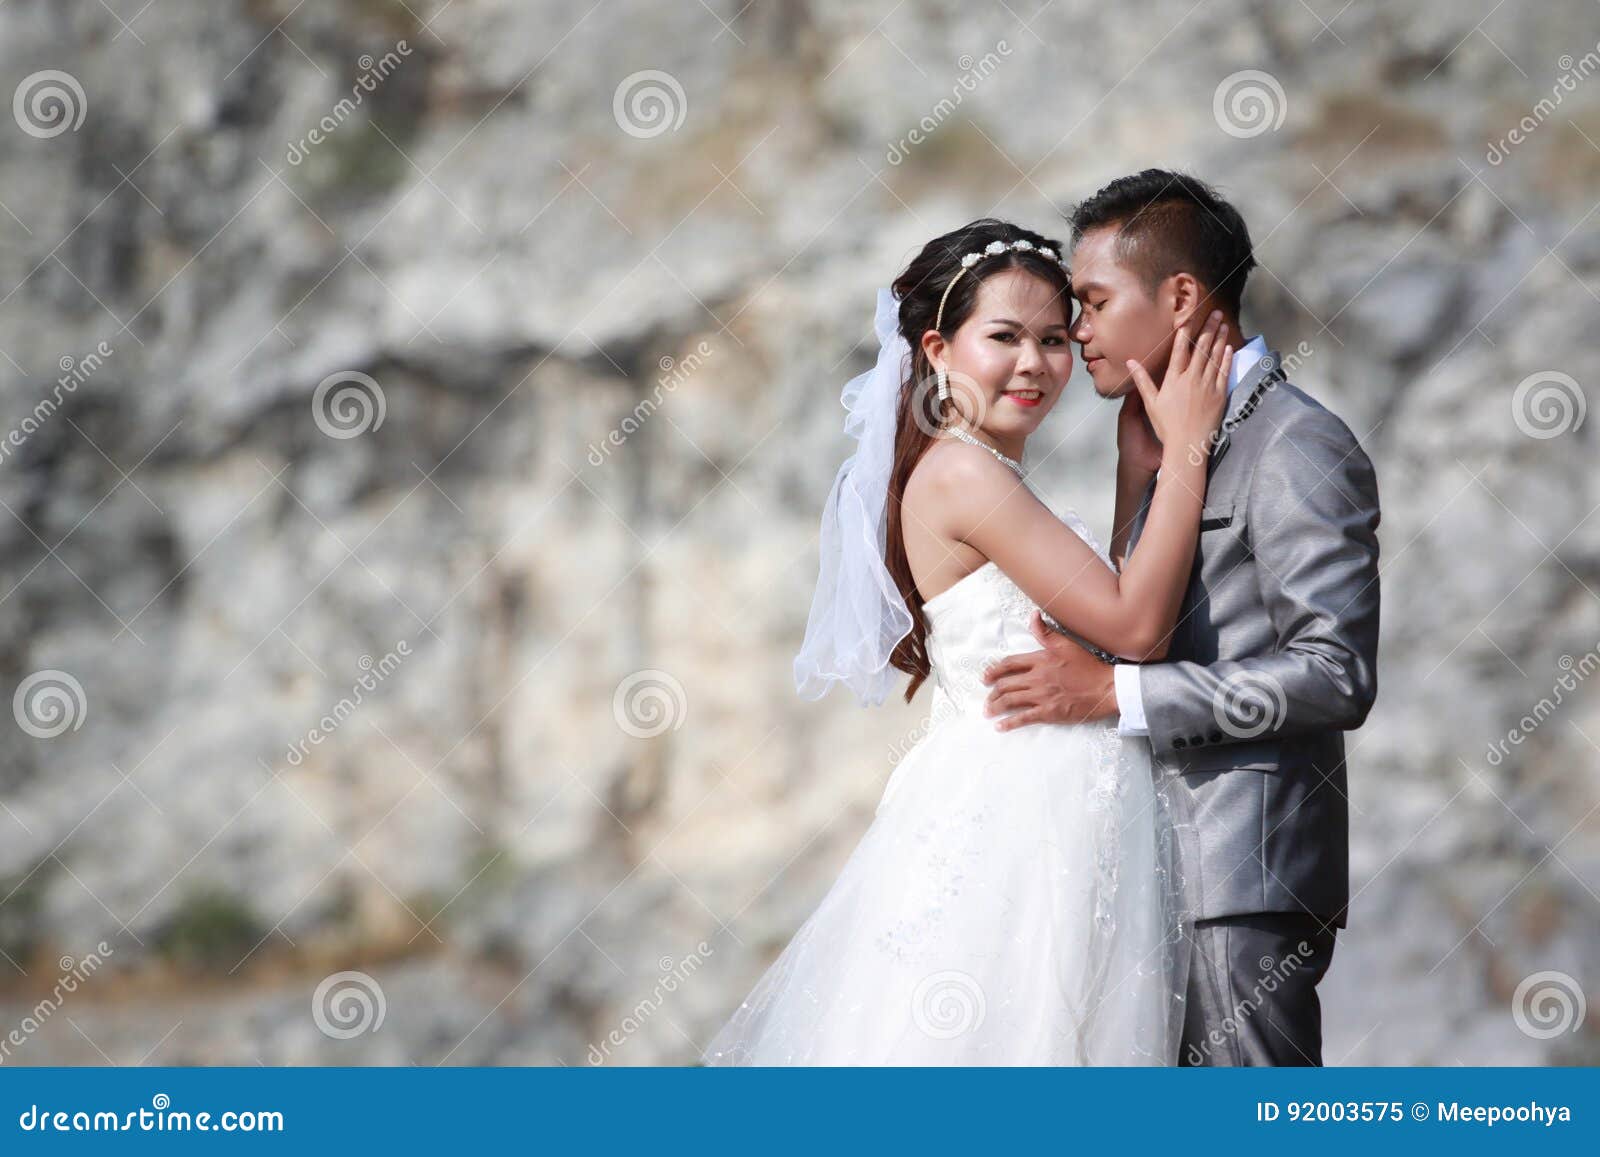 Asian Couples Photos of Pre Wedding Concept of Love and Marriage Stock  Image - Image of relationship, outdoor: 92003575